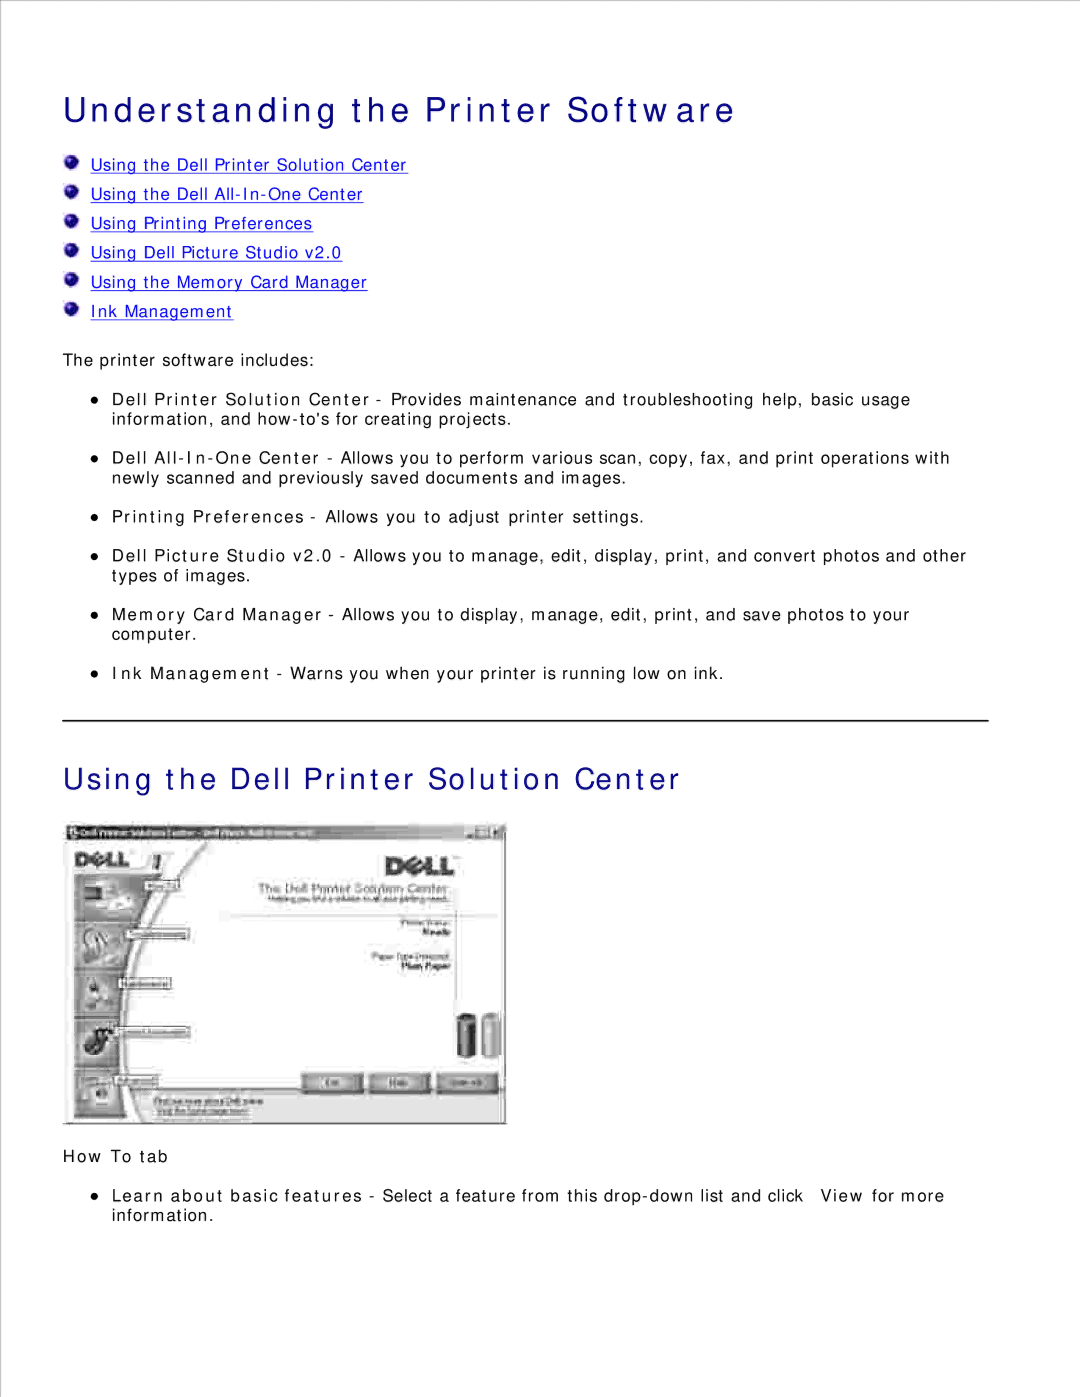 Dell 942 manual Understanding the Printer Software, Using the Dell Printer Solution Center, How To tab 